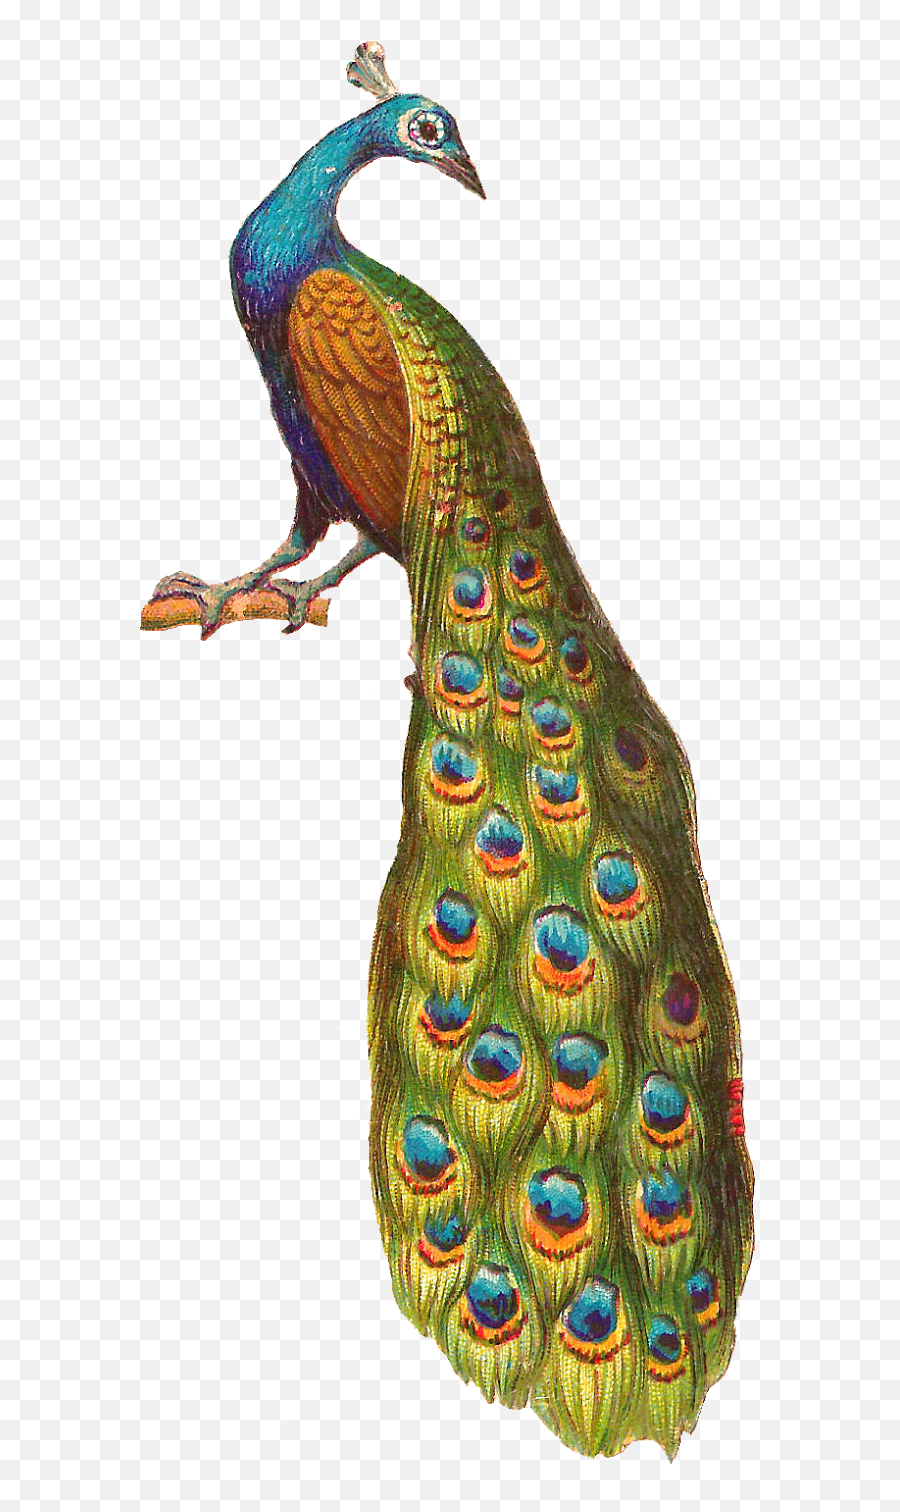 Peacock Png Clipart And Images - Beautiful Peacock Sitting On Branch,Peacock Png